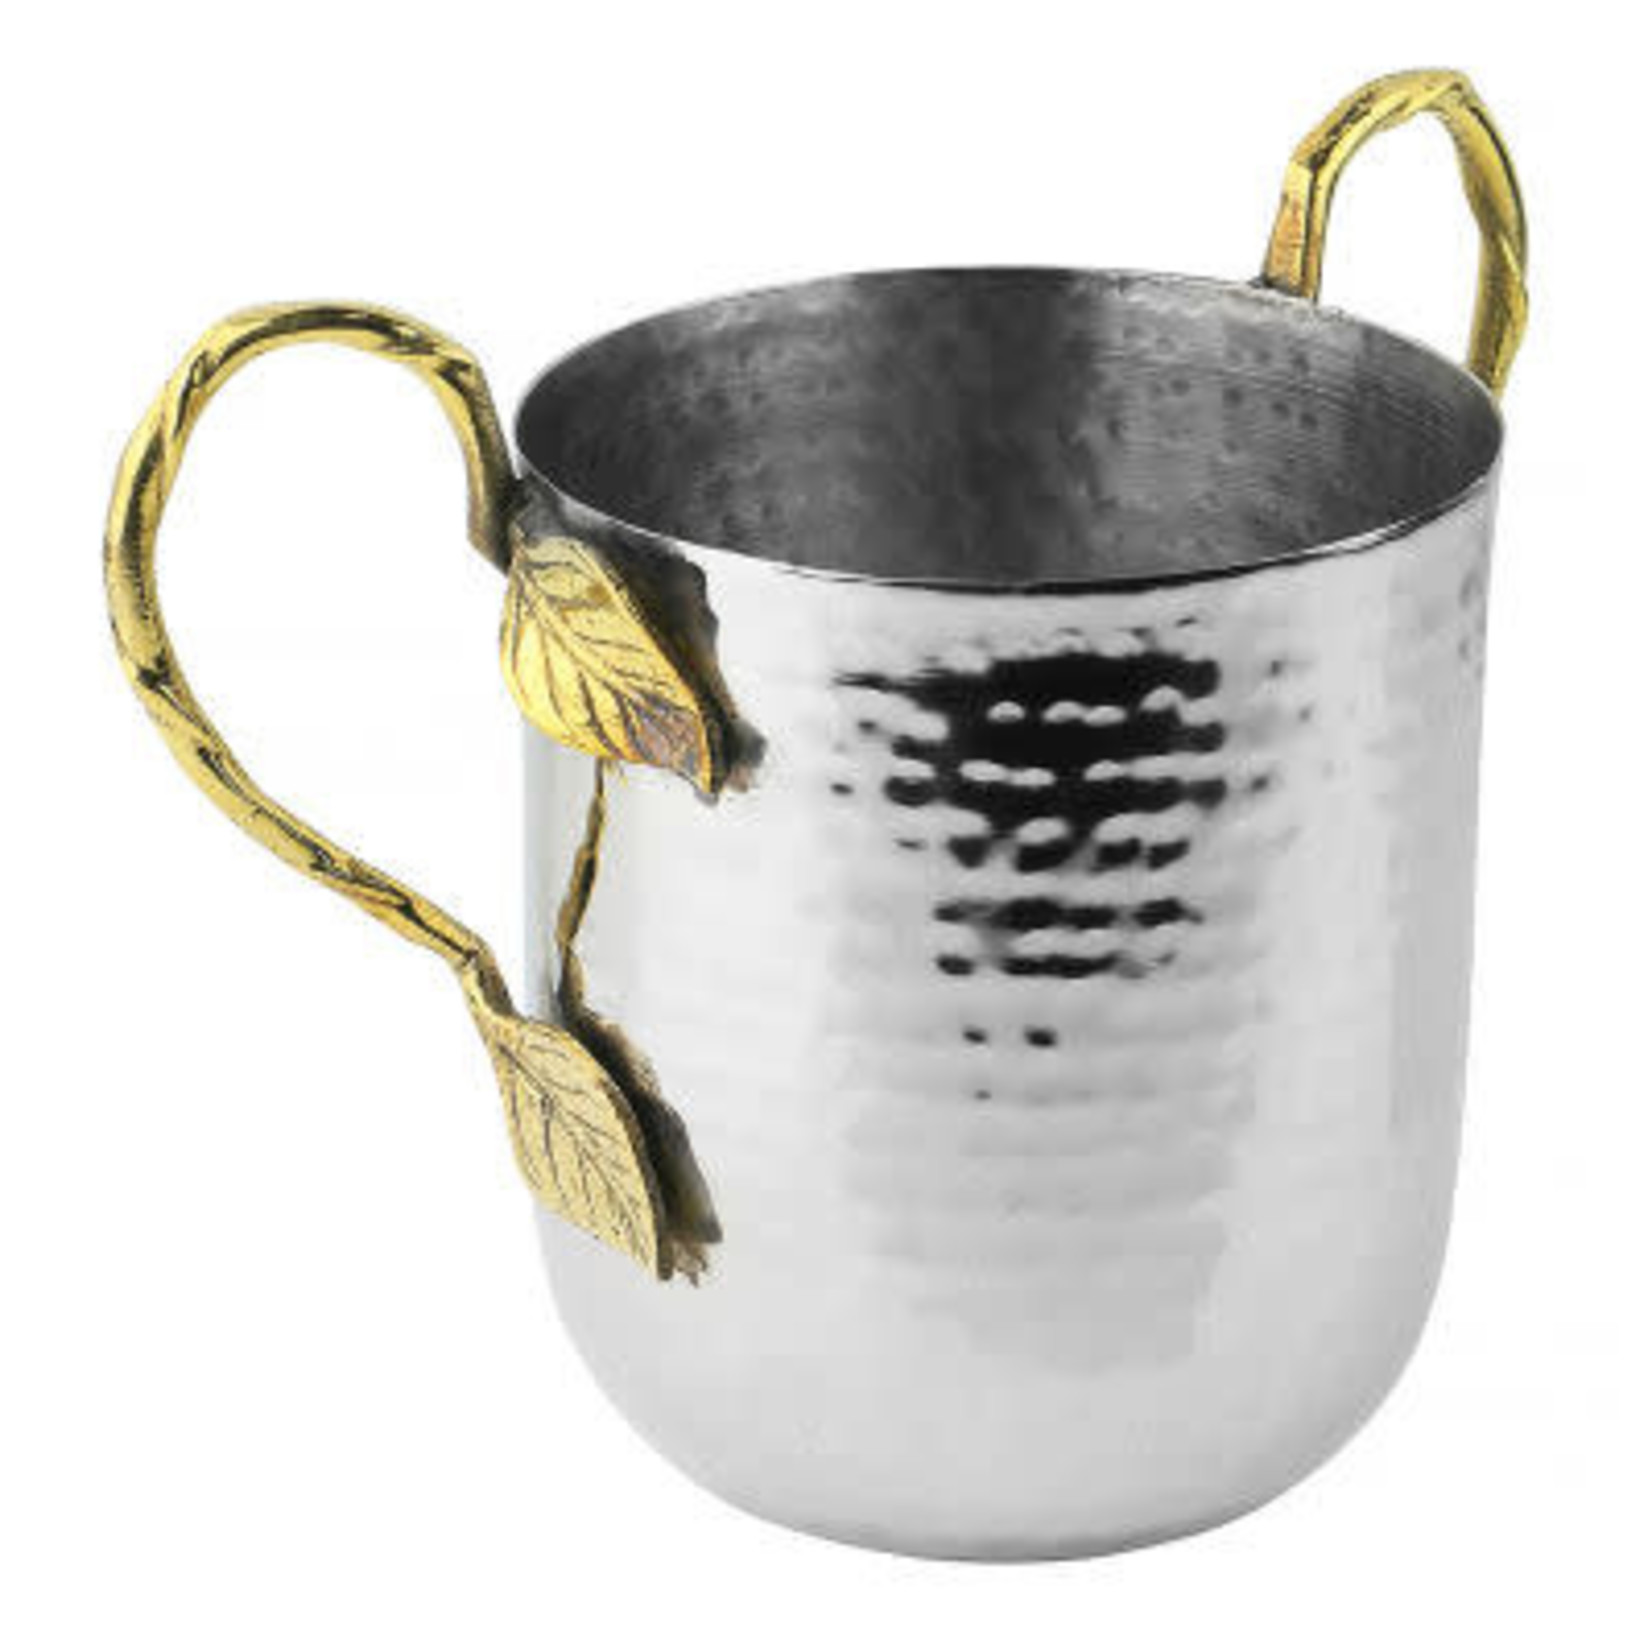 Stainless Steel Washing Cup Hammered Brass Handles-Small